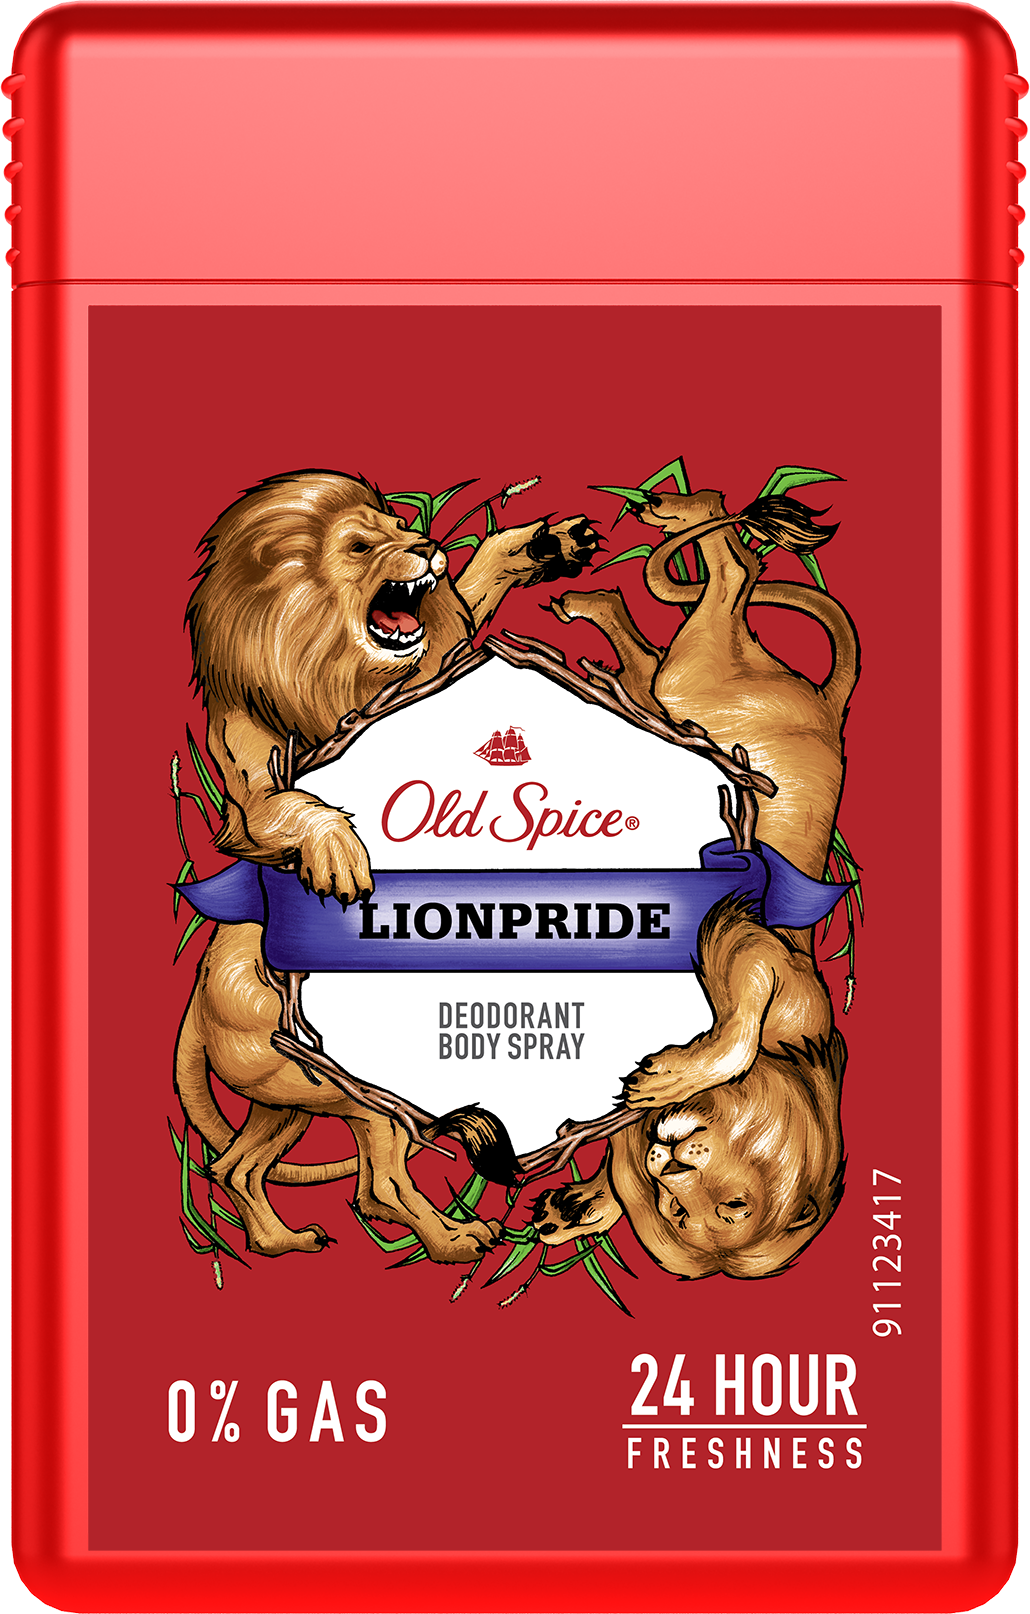 Old Spice Original Deodorant Personal Grooming Birthday Gift Set for Men